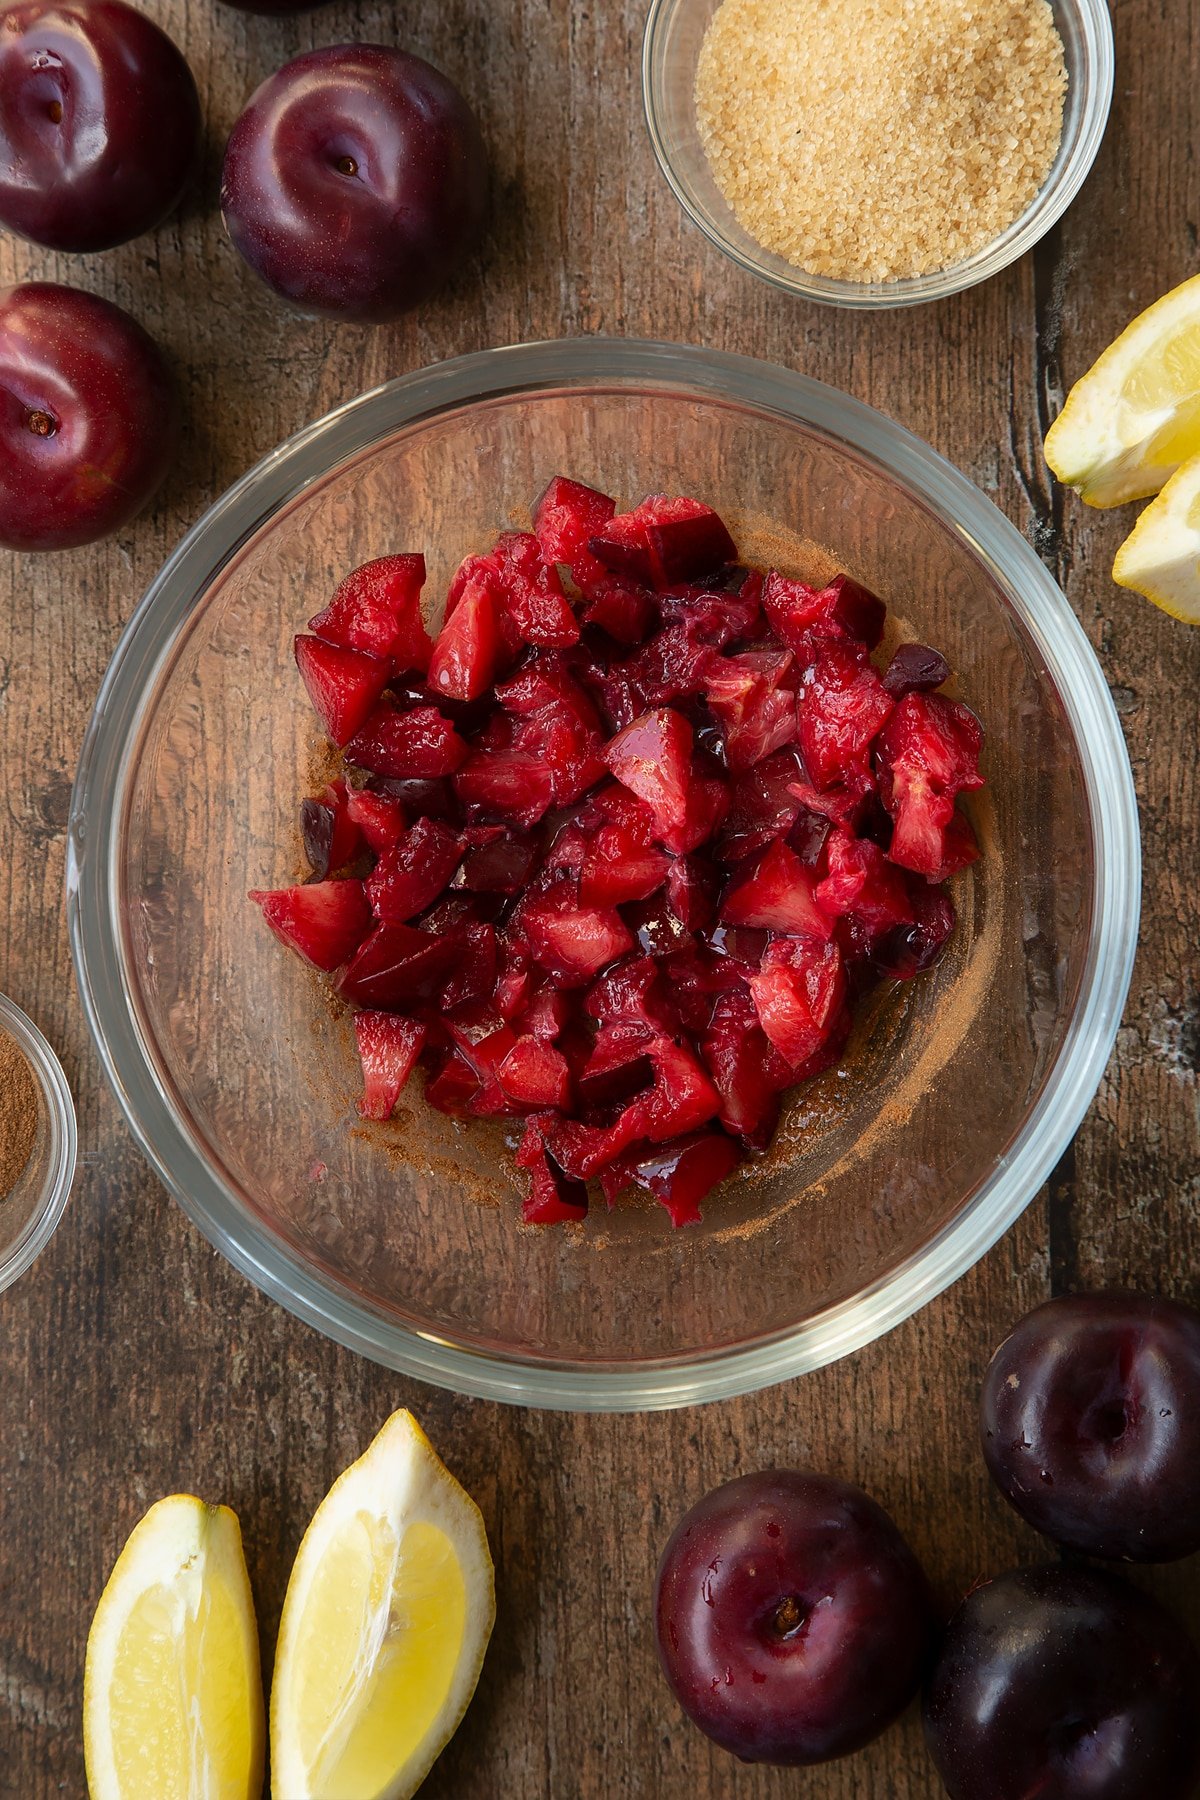 Sugar, lemon juice, cinnamon and plums in a glass mixing bowl. Ingredients to make a plum pastry recipe surround the bowl.